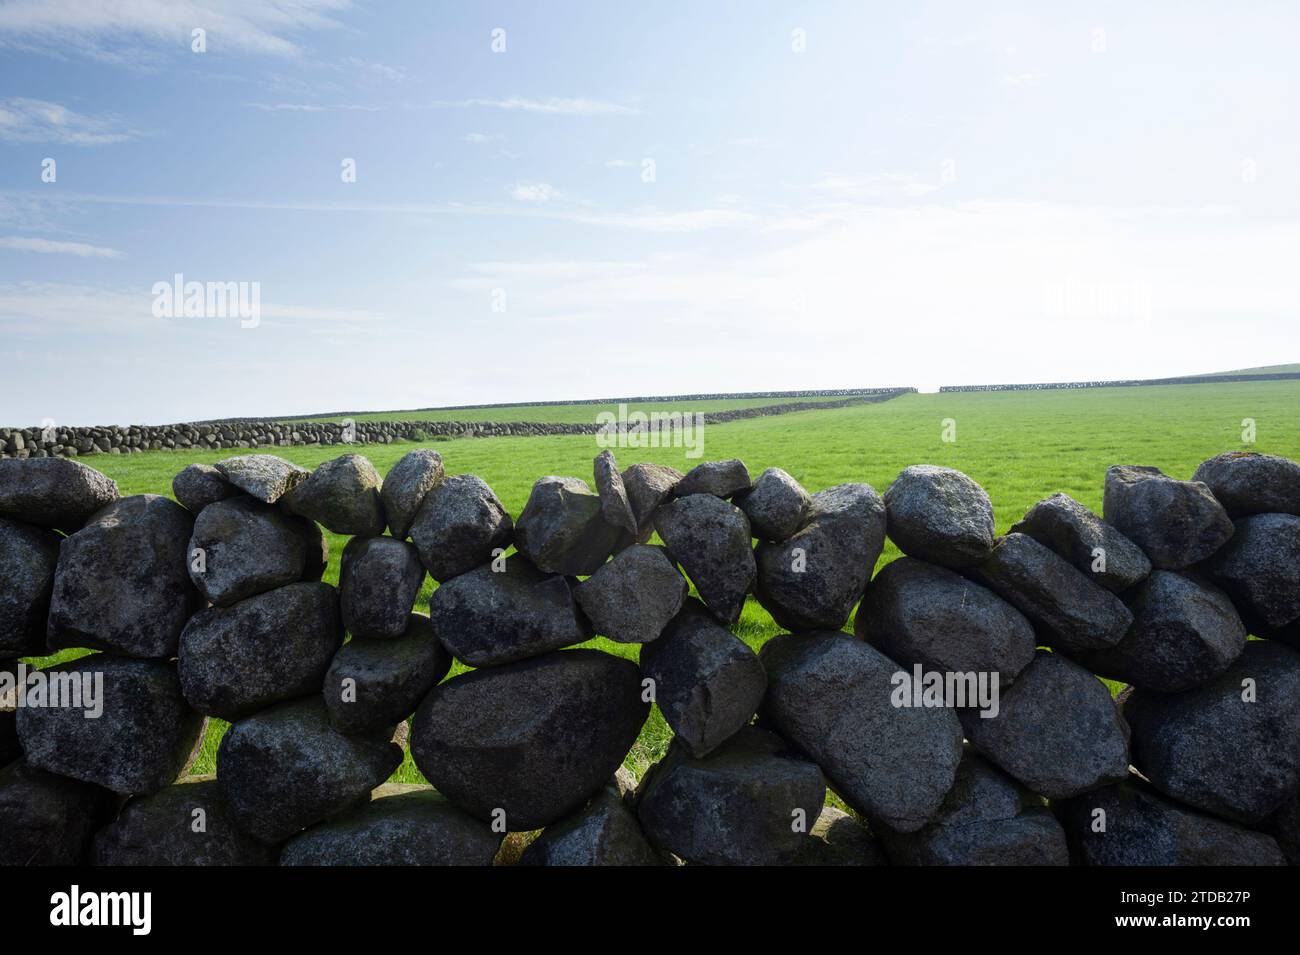 Granite stone walls in the Mourne Mountains. County Down, Northern Ireland, UK. Stock Photo